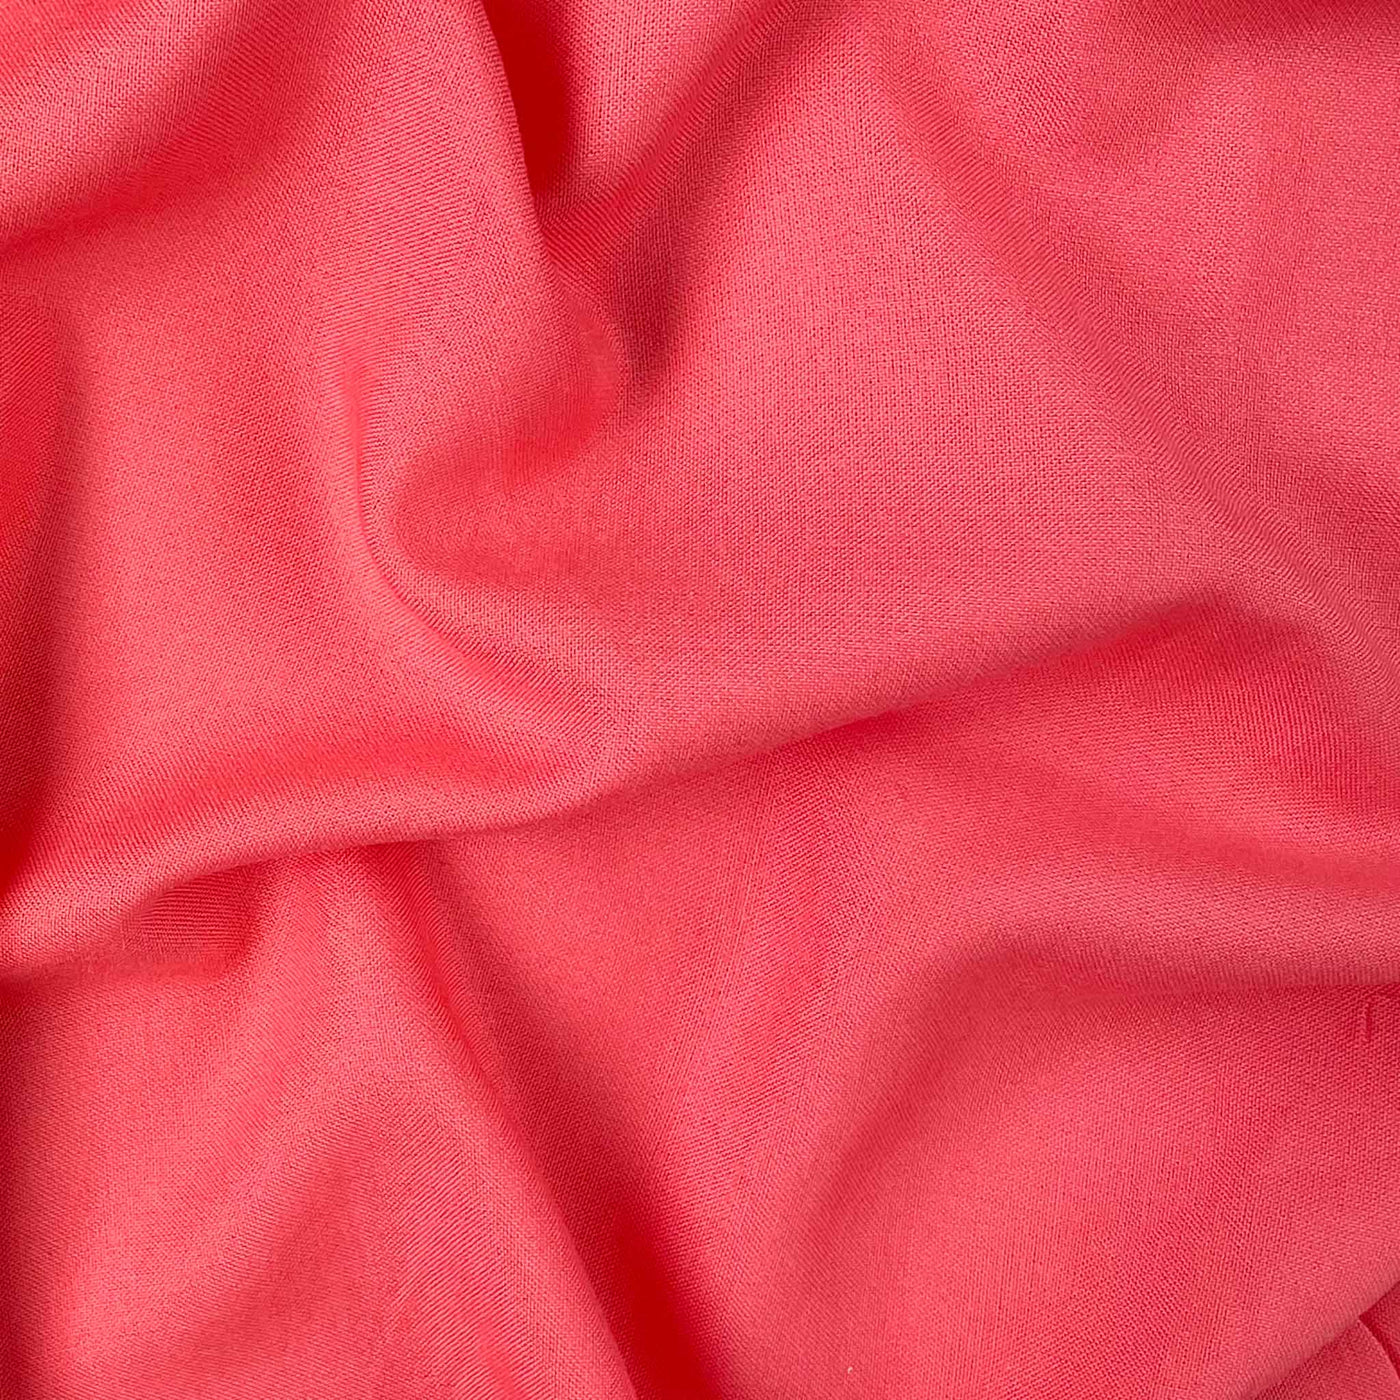 Fabric Pandit Fabric Soft Peach Color Pure Rayon Fabric (Width 42 Inches)